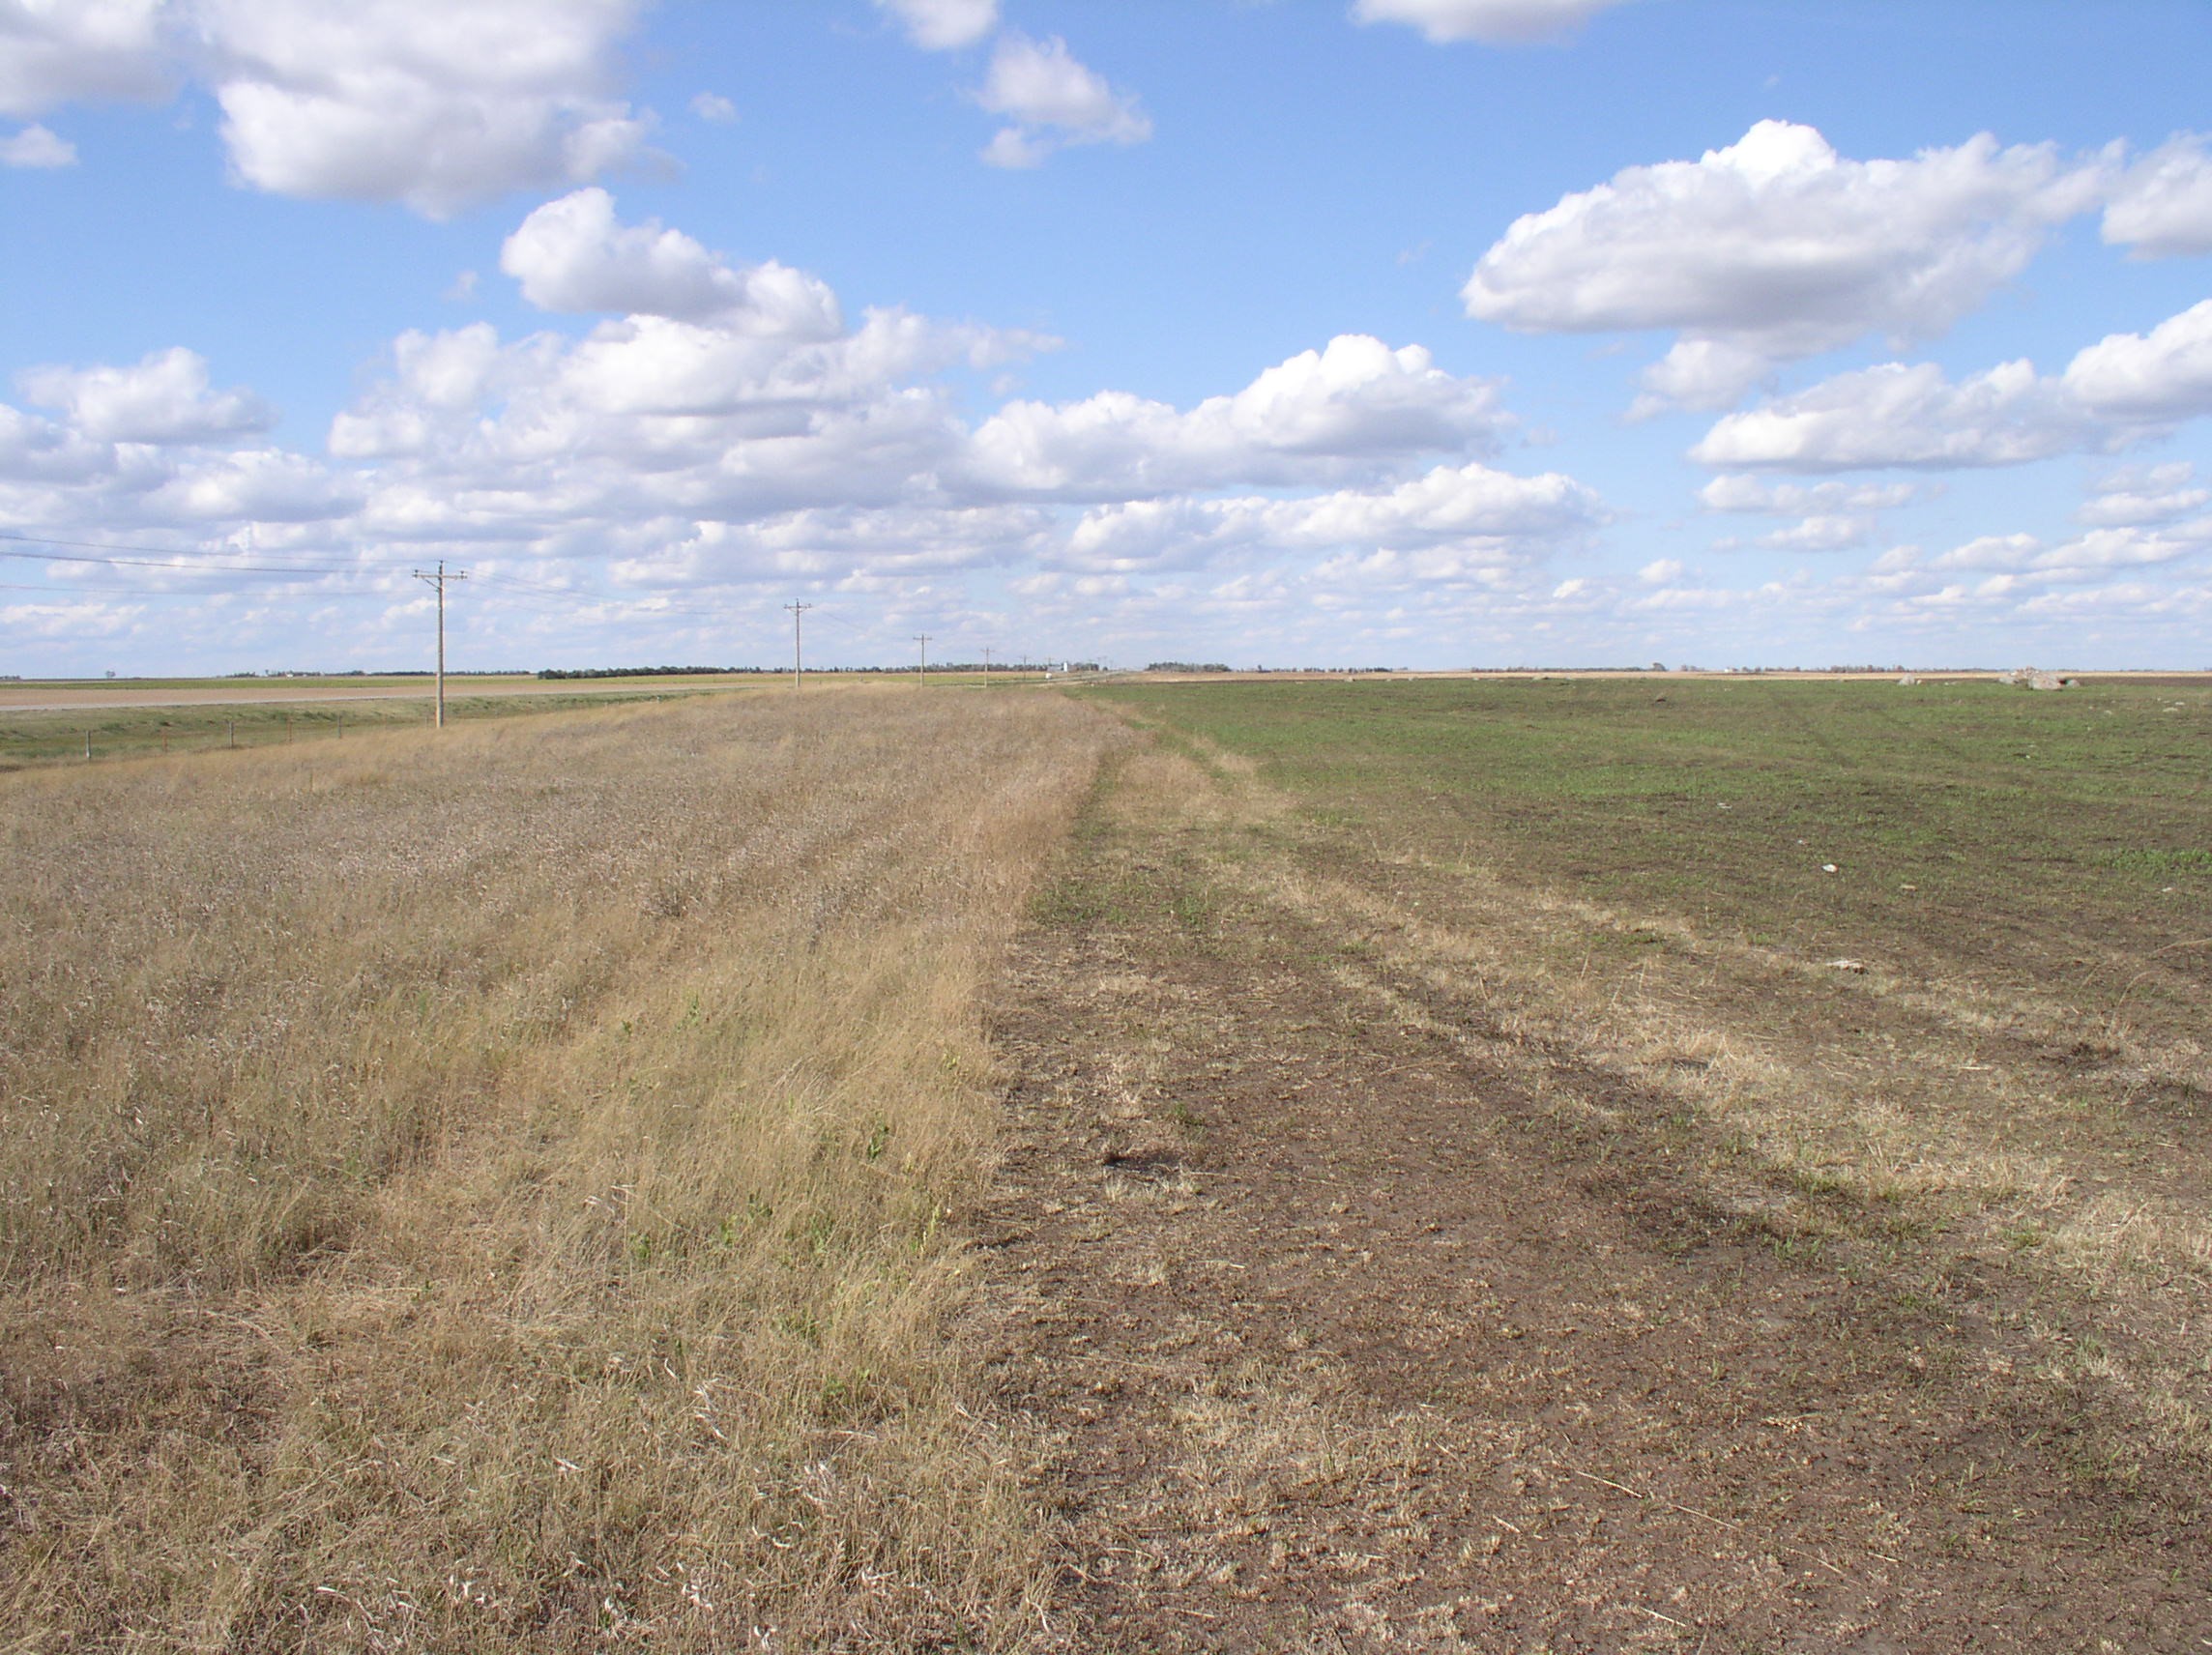 grassland recovering from wildfire. grass on the right side is greening up.